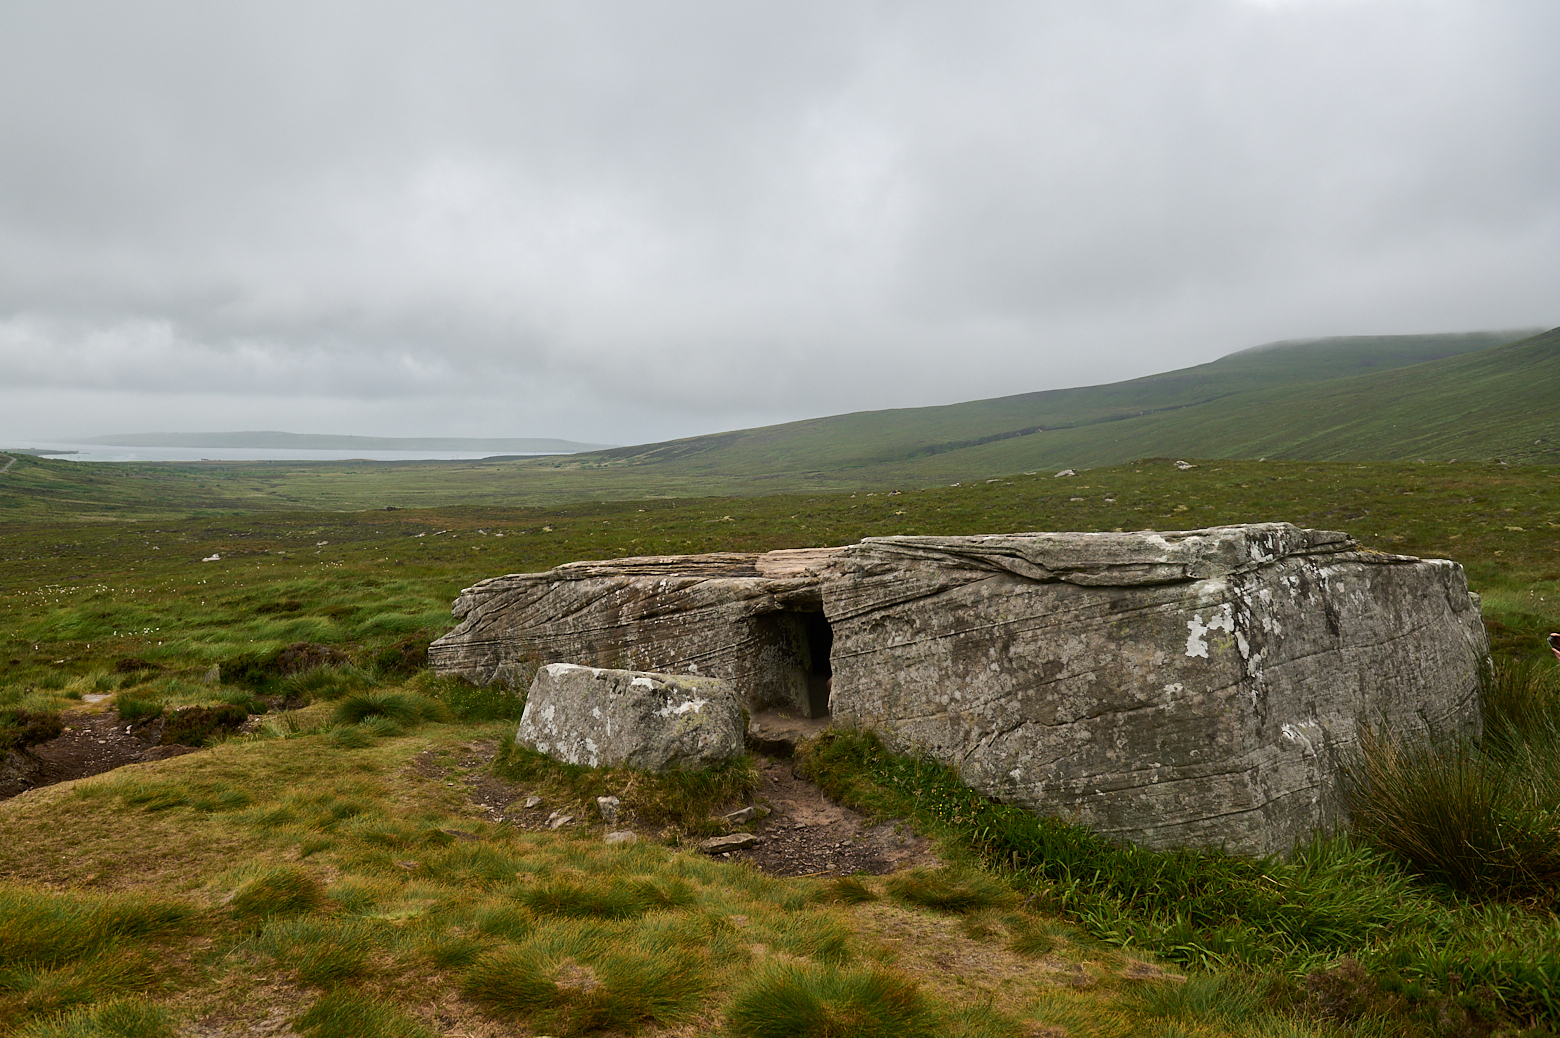 A day trip to Hoy, the island under the cloud, visiting Betty Corrigans Grave and Rackwick beach.